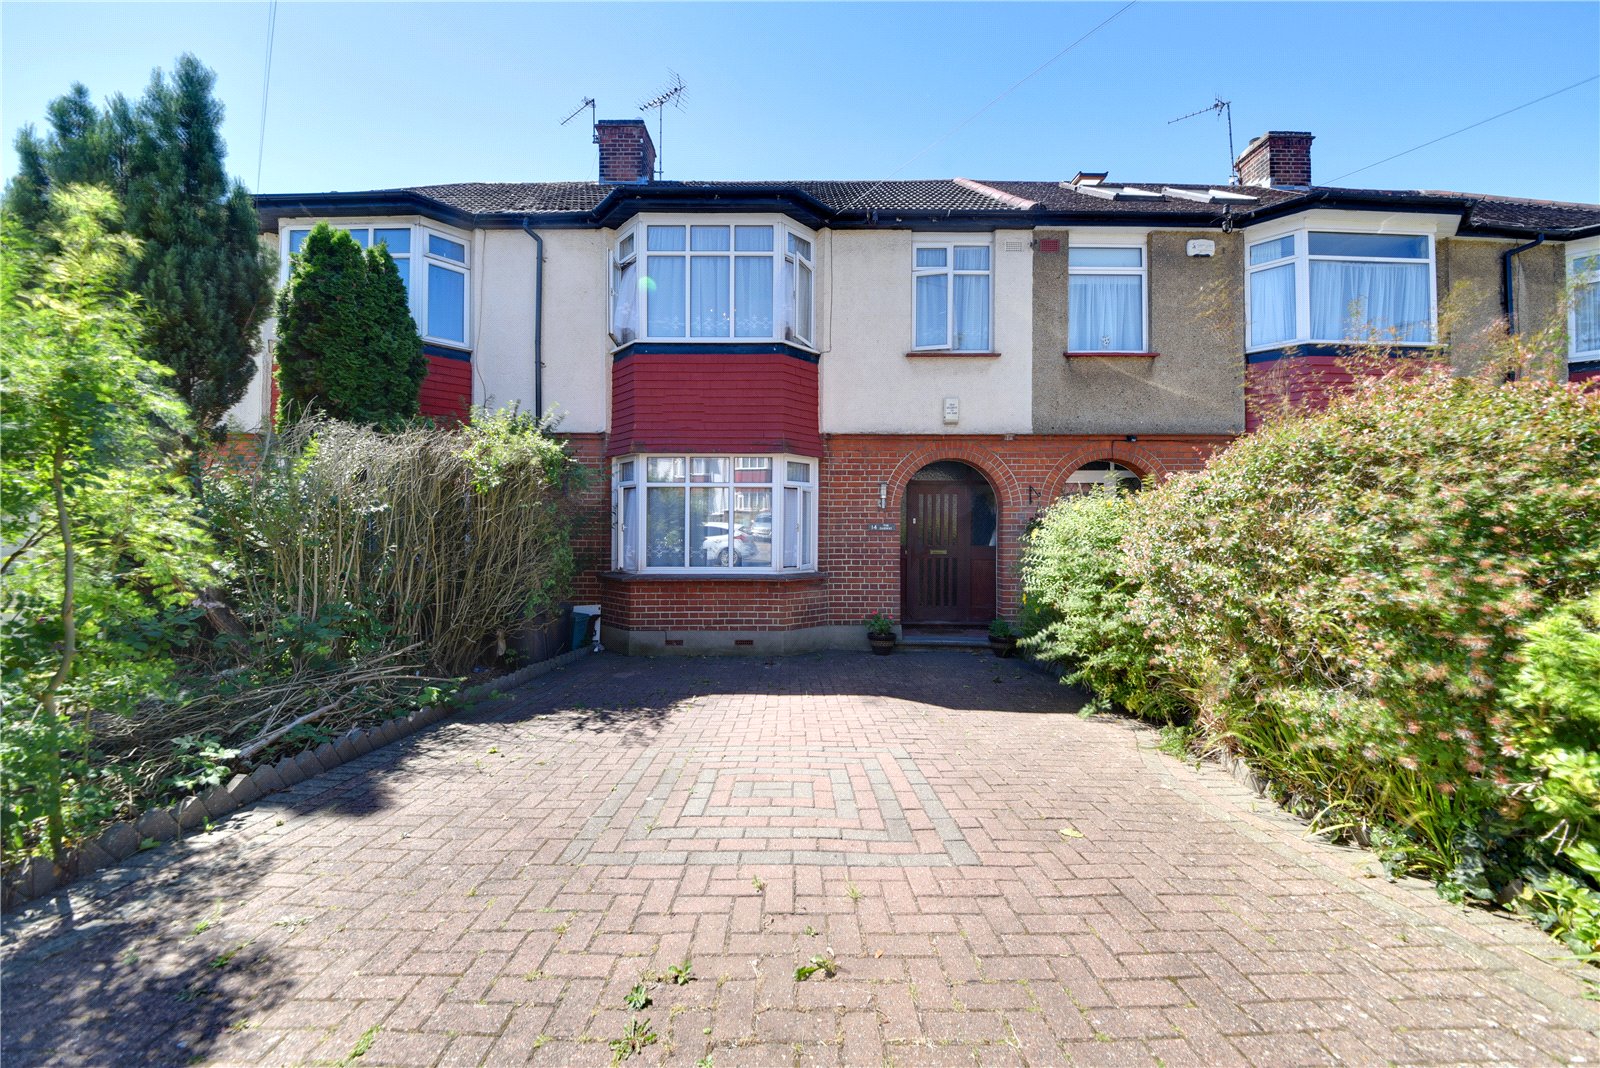 3 bed house for sale in The Fairway, Southgate - Property Image 1